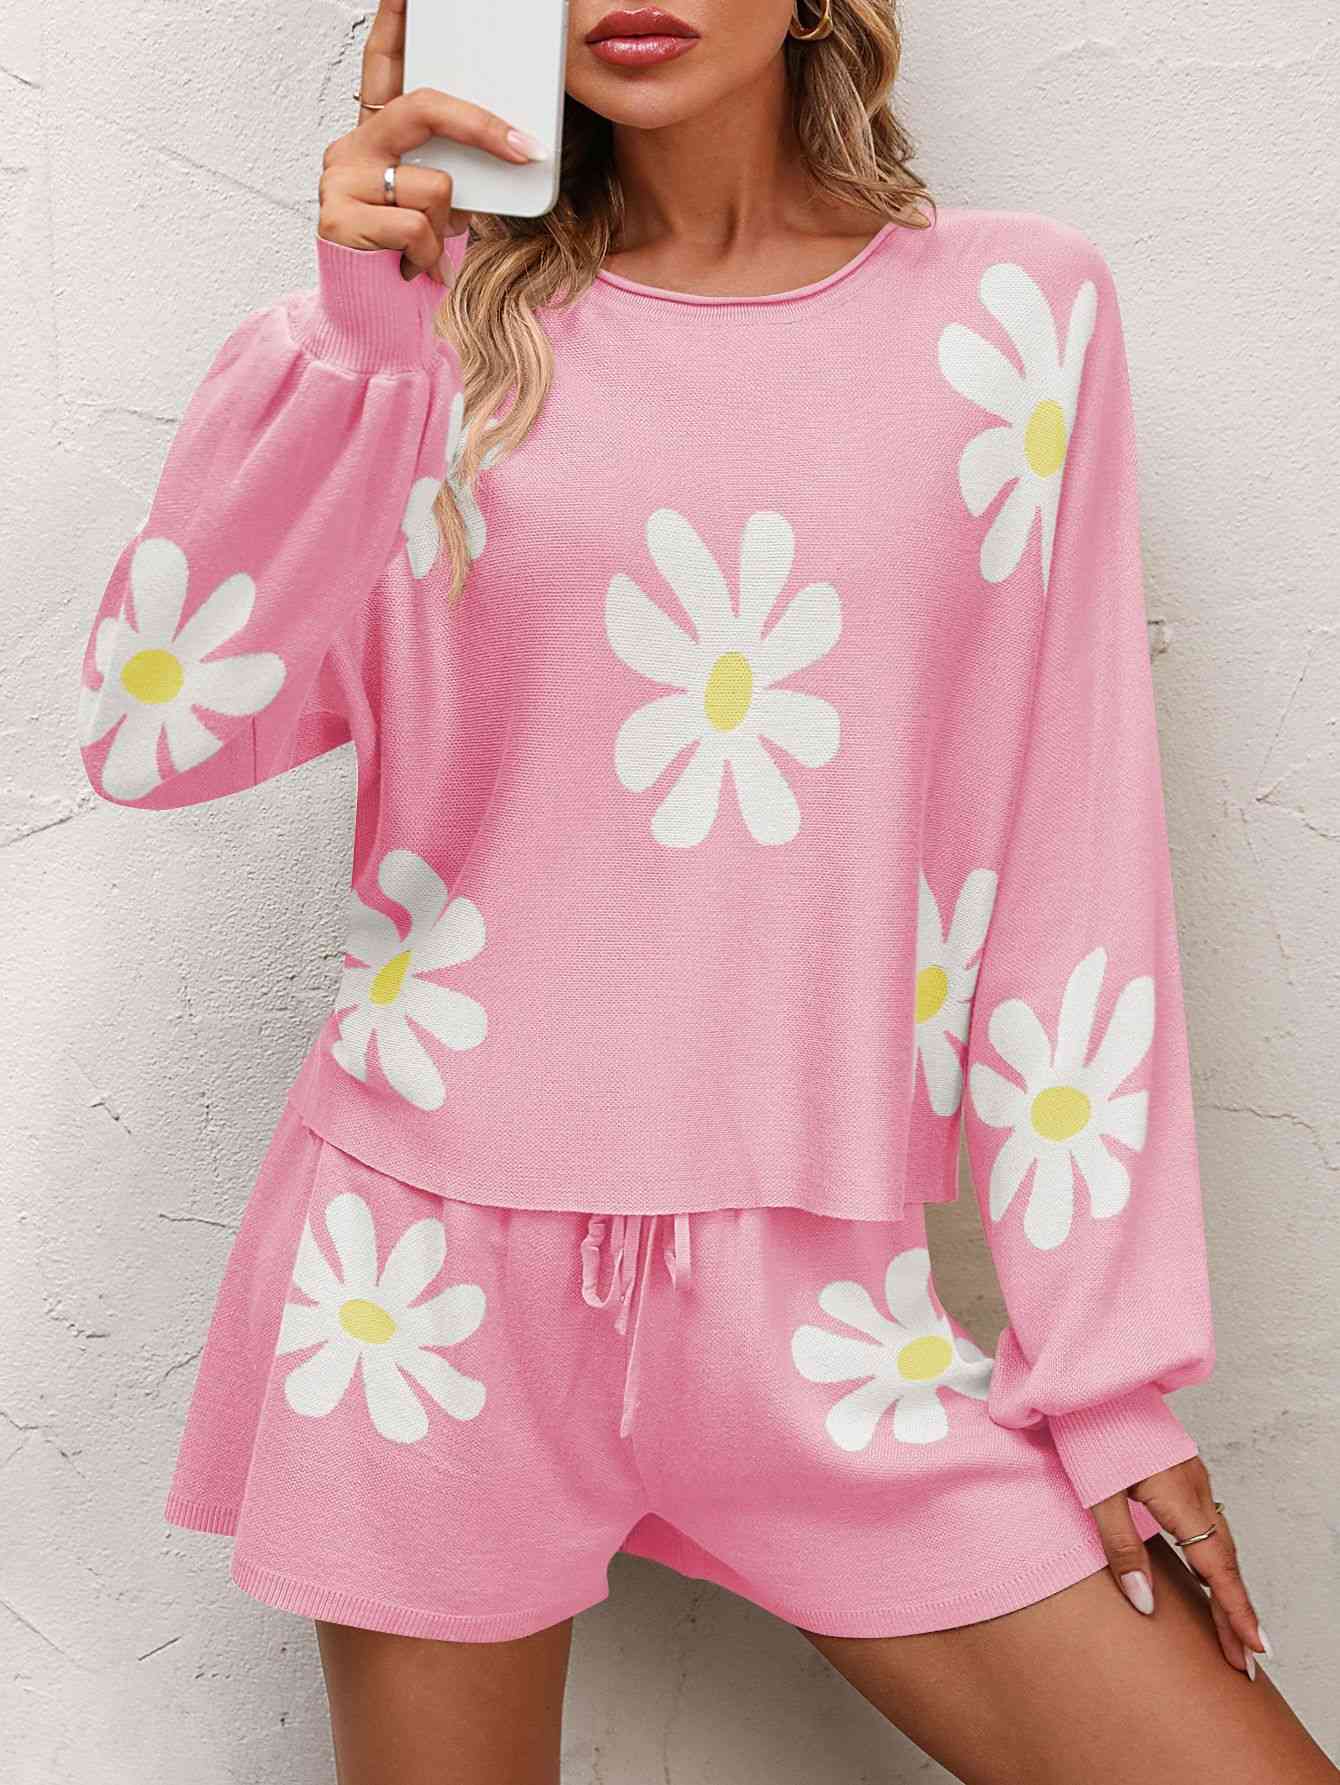 Women's Floral Print Raglan Sleeve Knit Top and Tie Front Sweater Shorts Set Carnation Pink